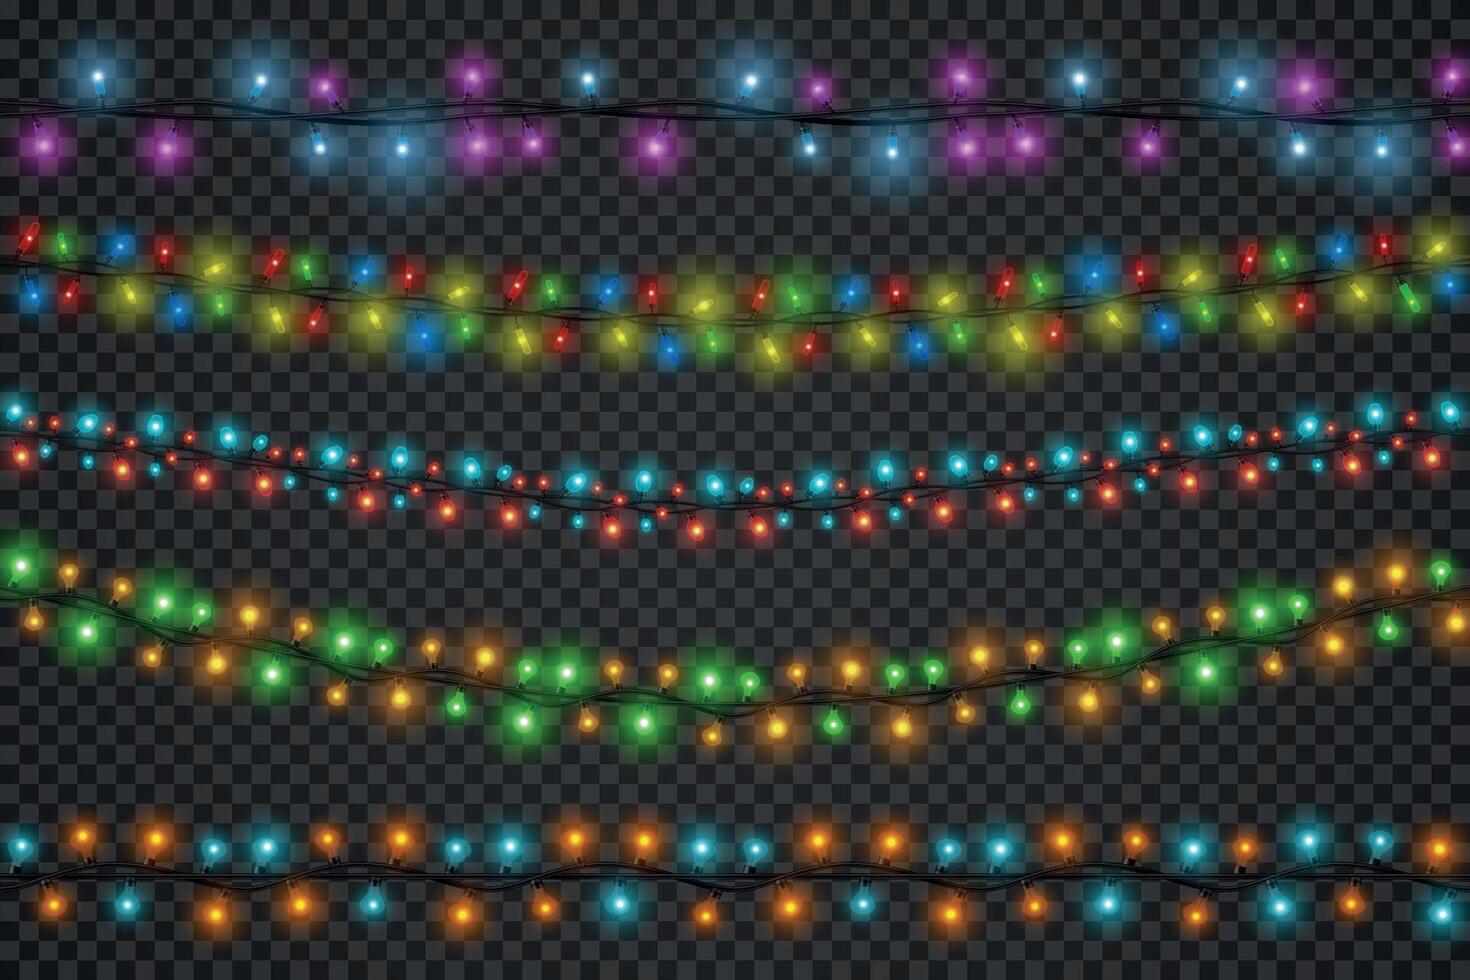 Realistic christmas colored glowing light garlands borders. Winter holidays, party or festive decoration string with led lights vector set